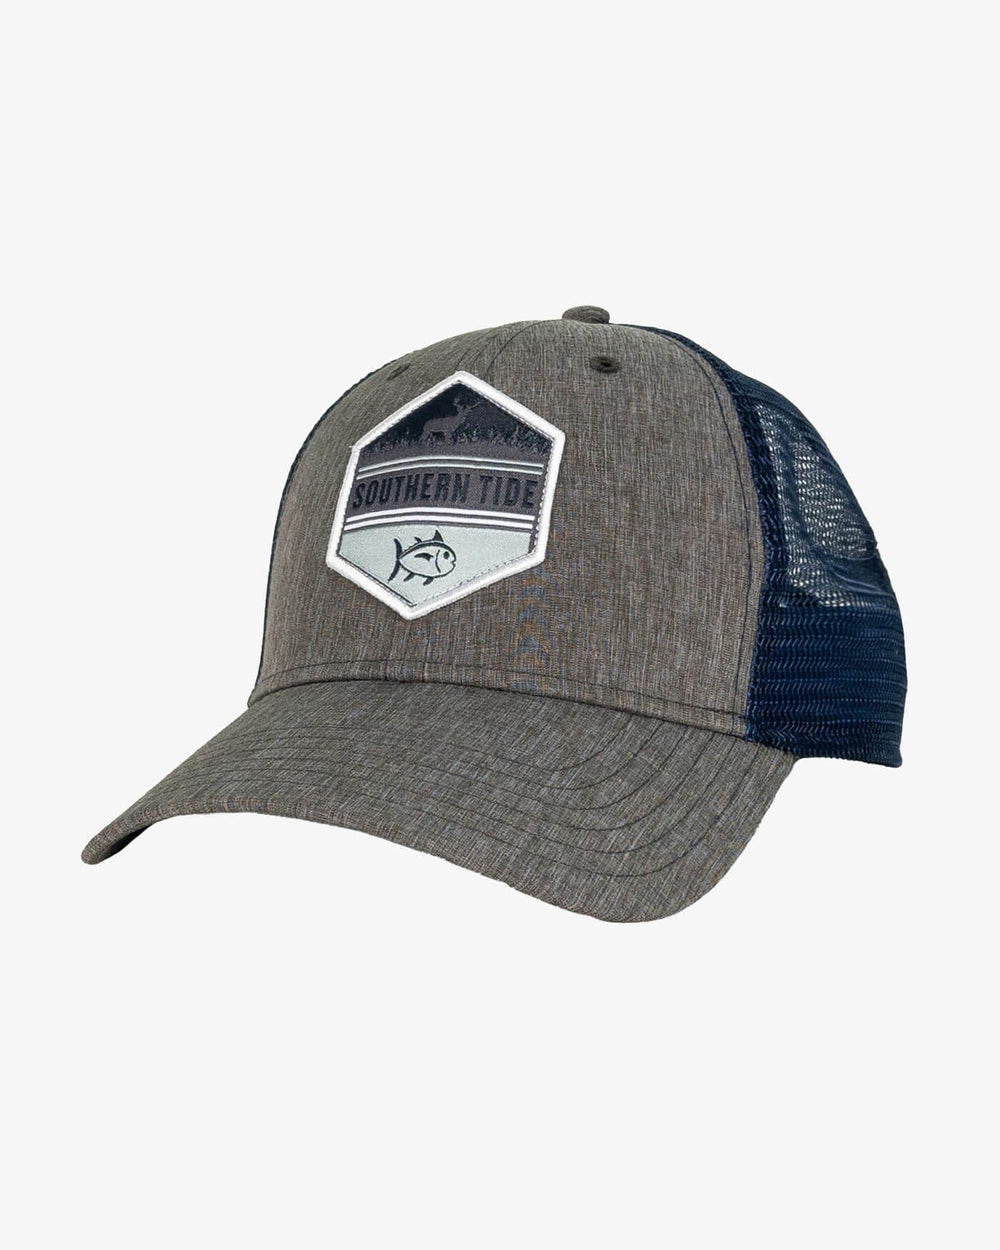 The front view of the Southern Tide Southern Tide Deer Hexagon Trucker by Southern Tide - Grey